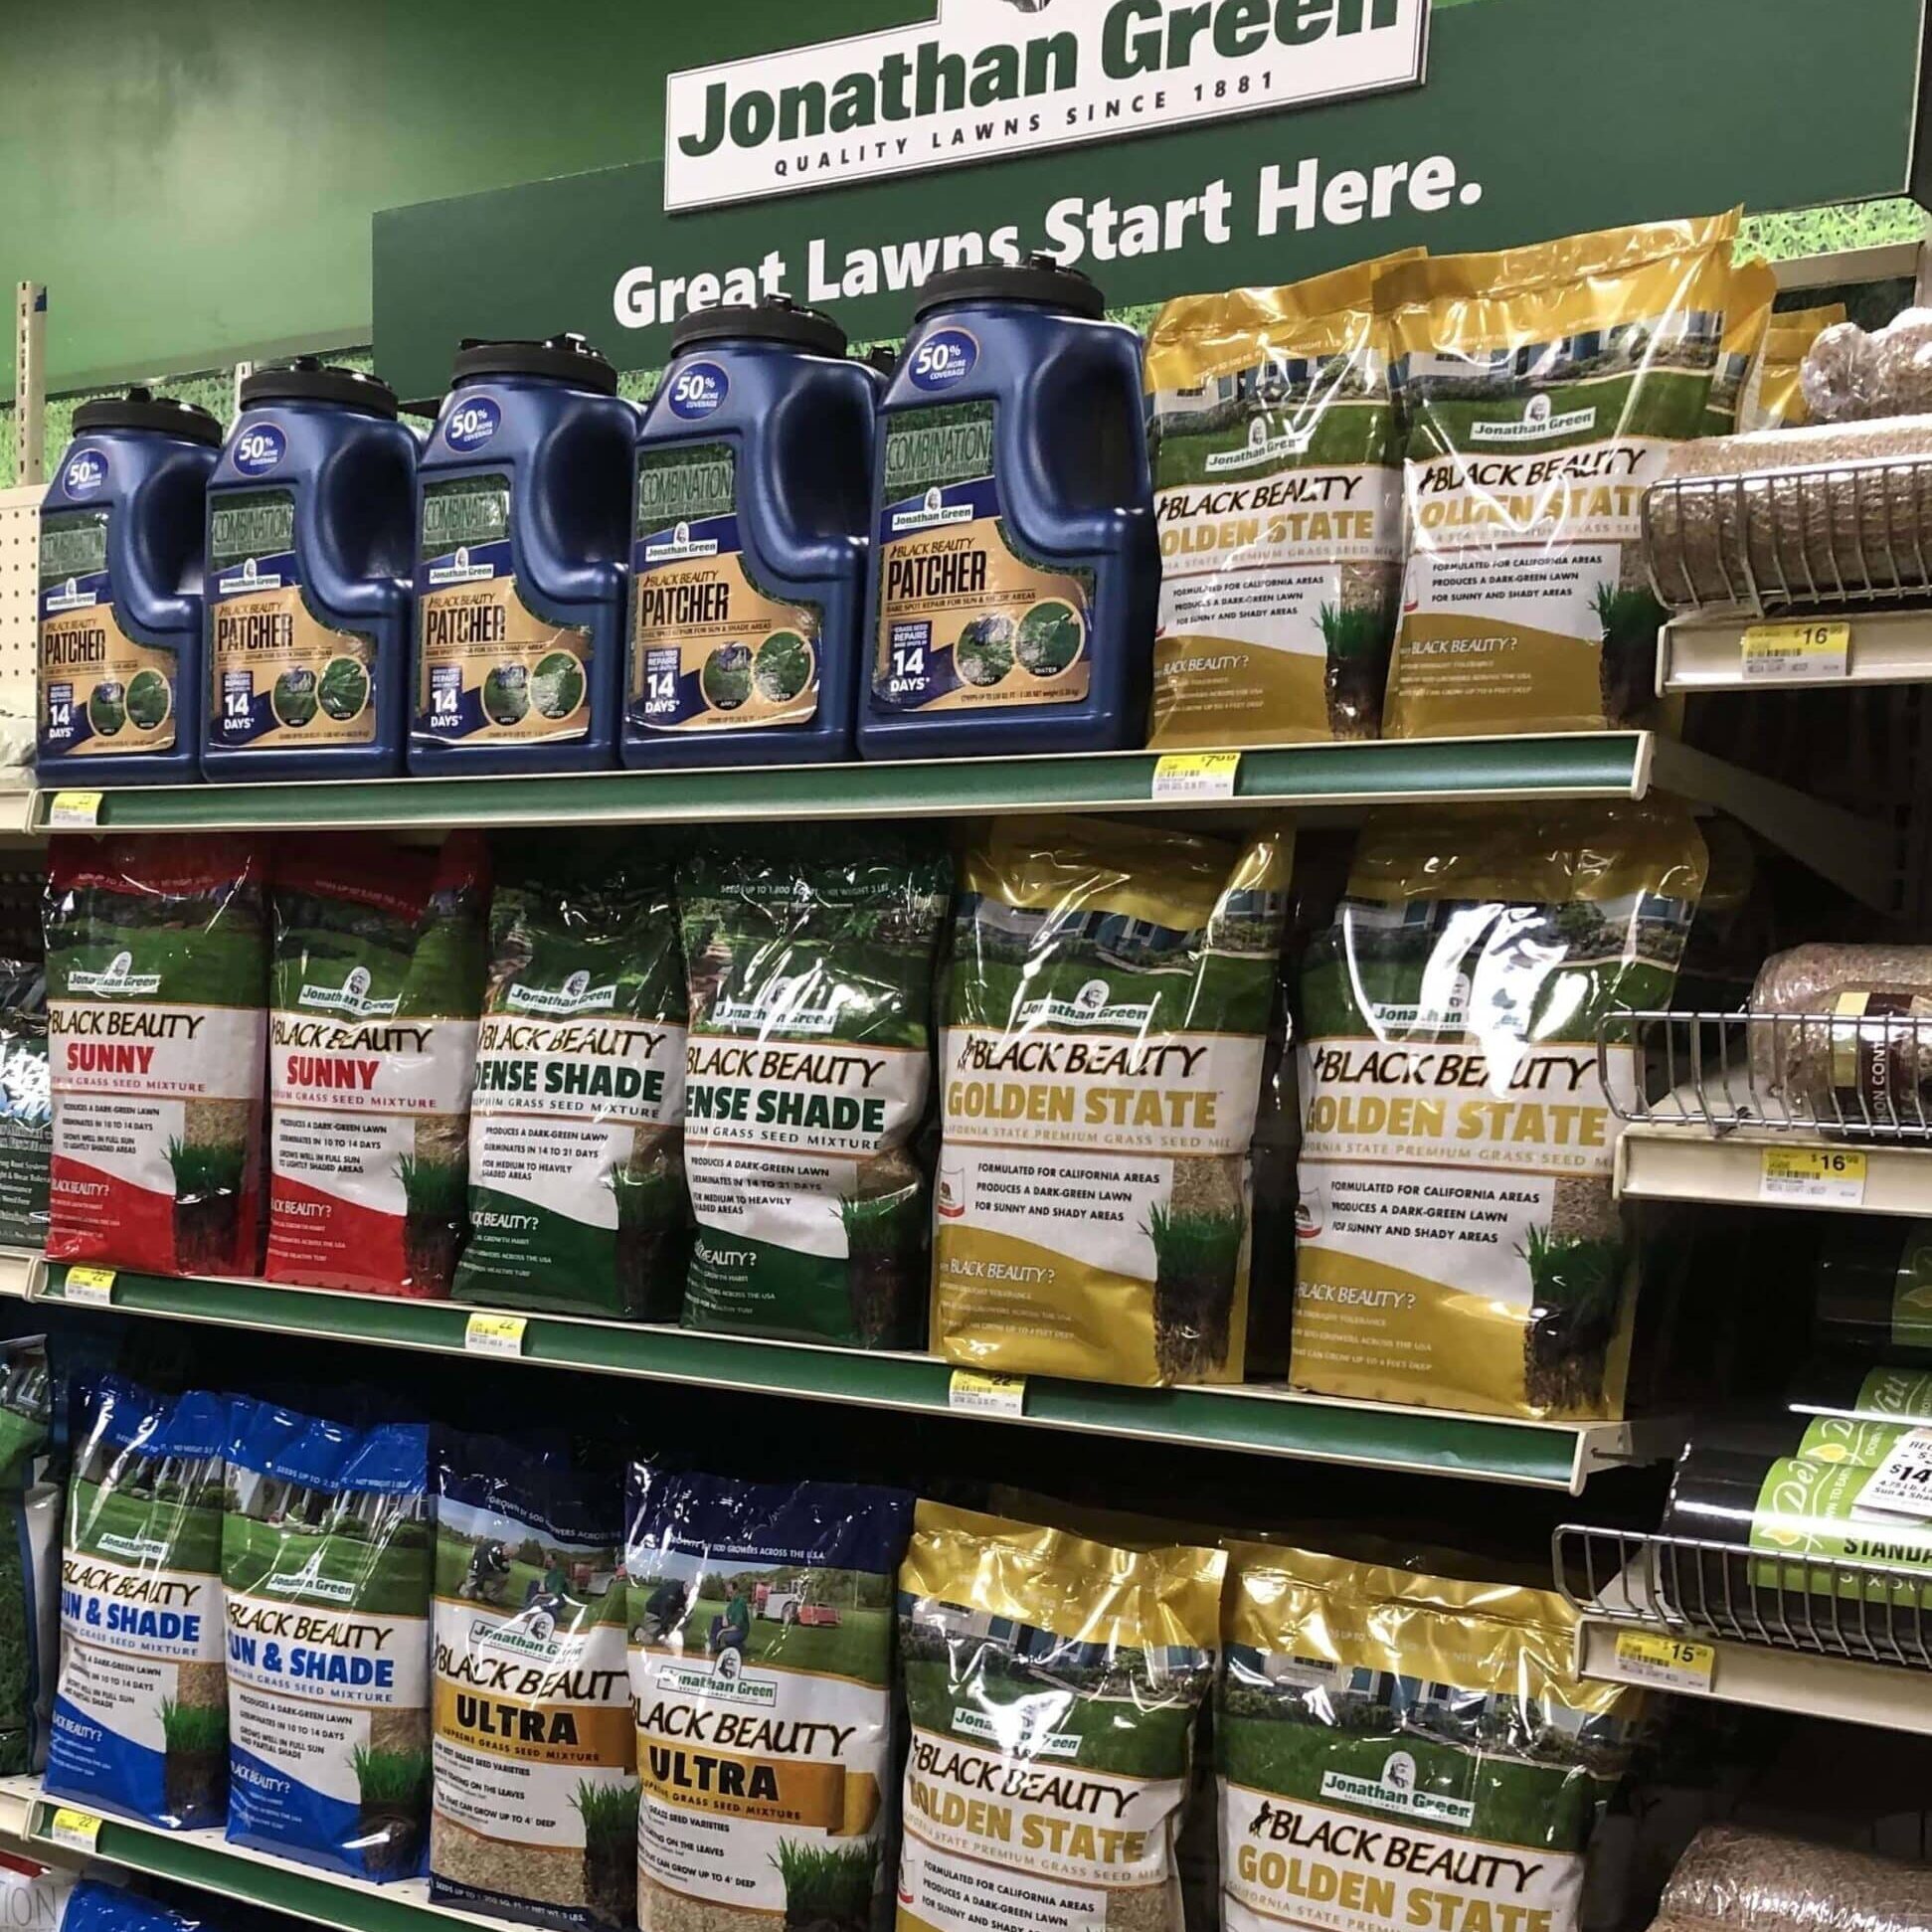 Aisle in a store displaying various Jonathan Green grass seed products under a sign stating "Great Lawns Start Here," available at Jonathan Green grass seed retailers.